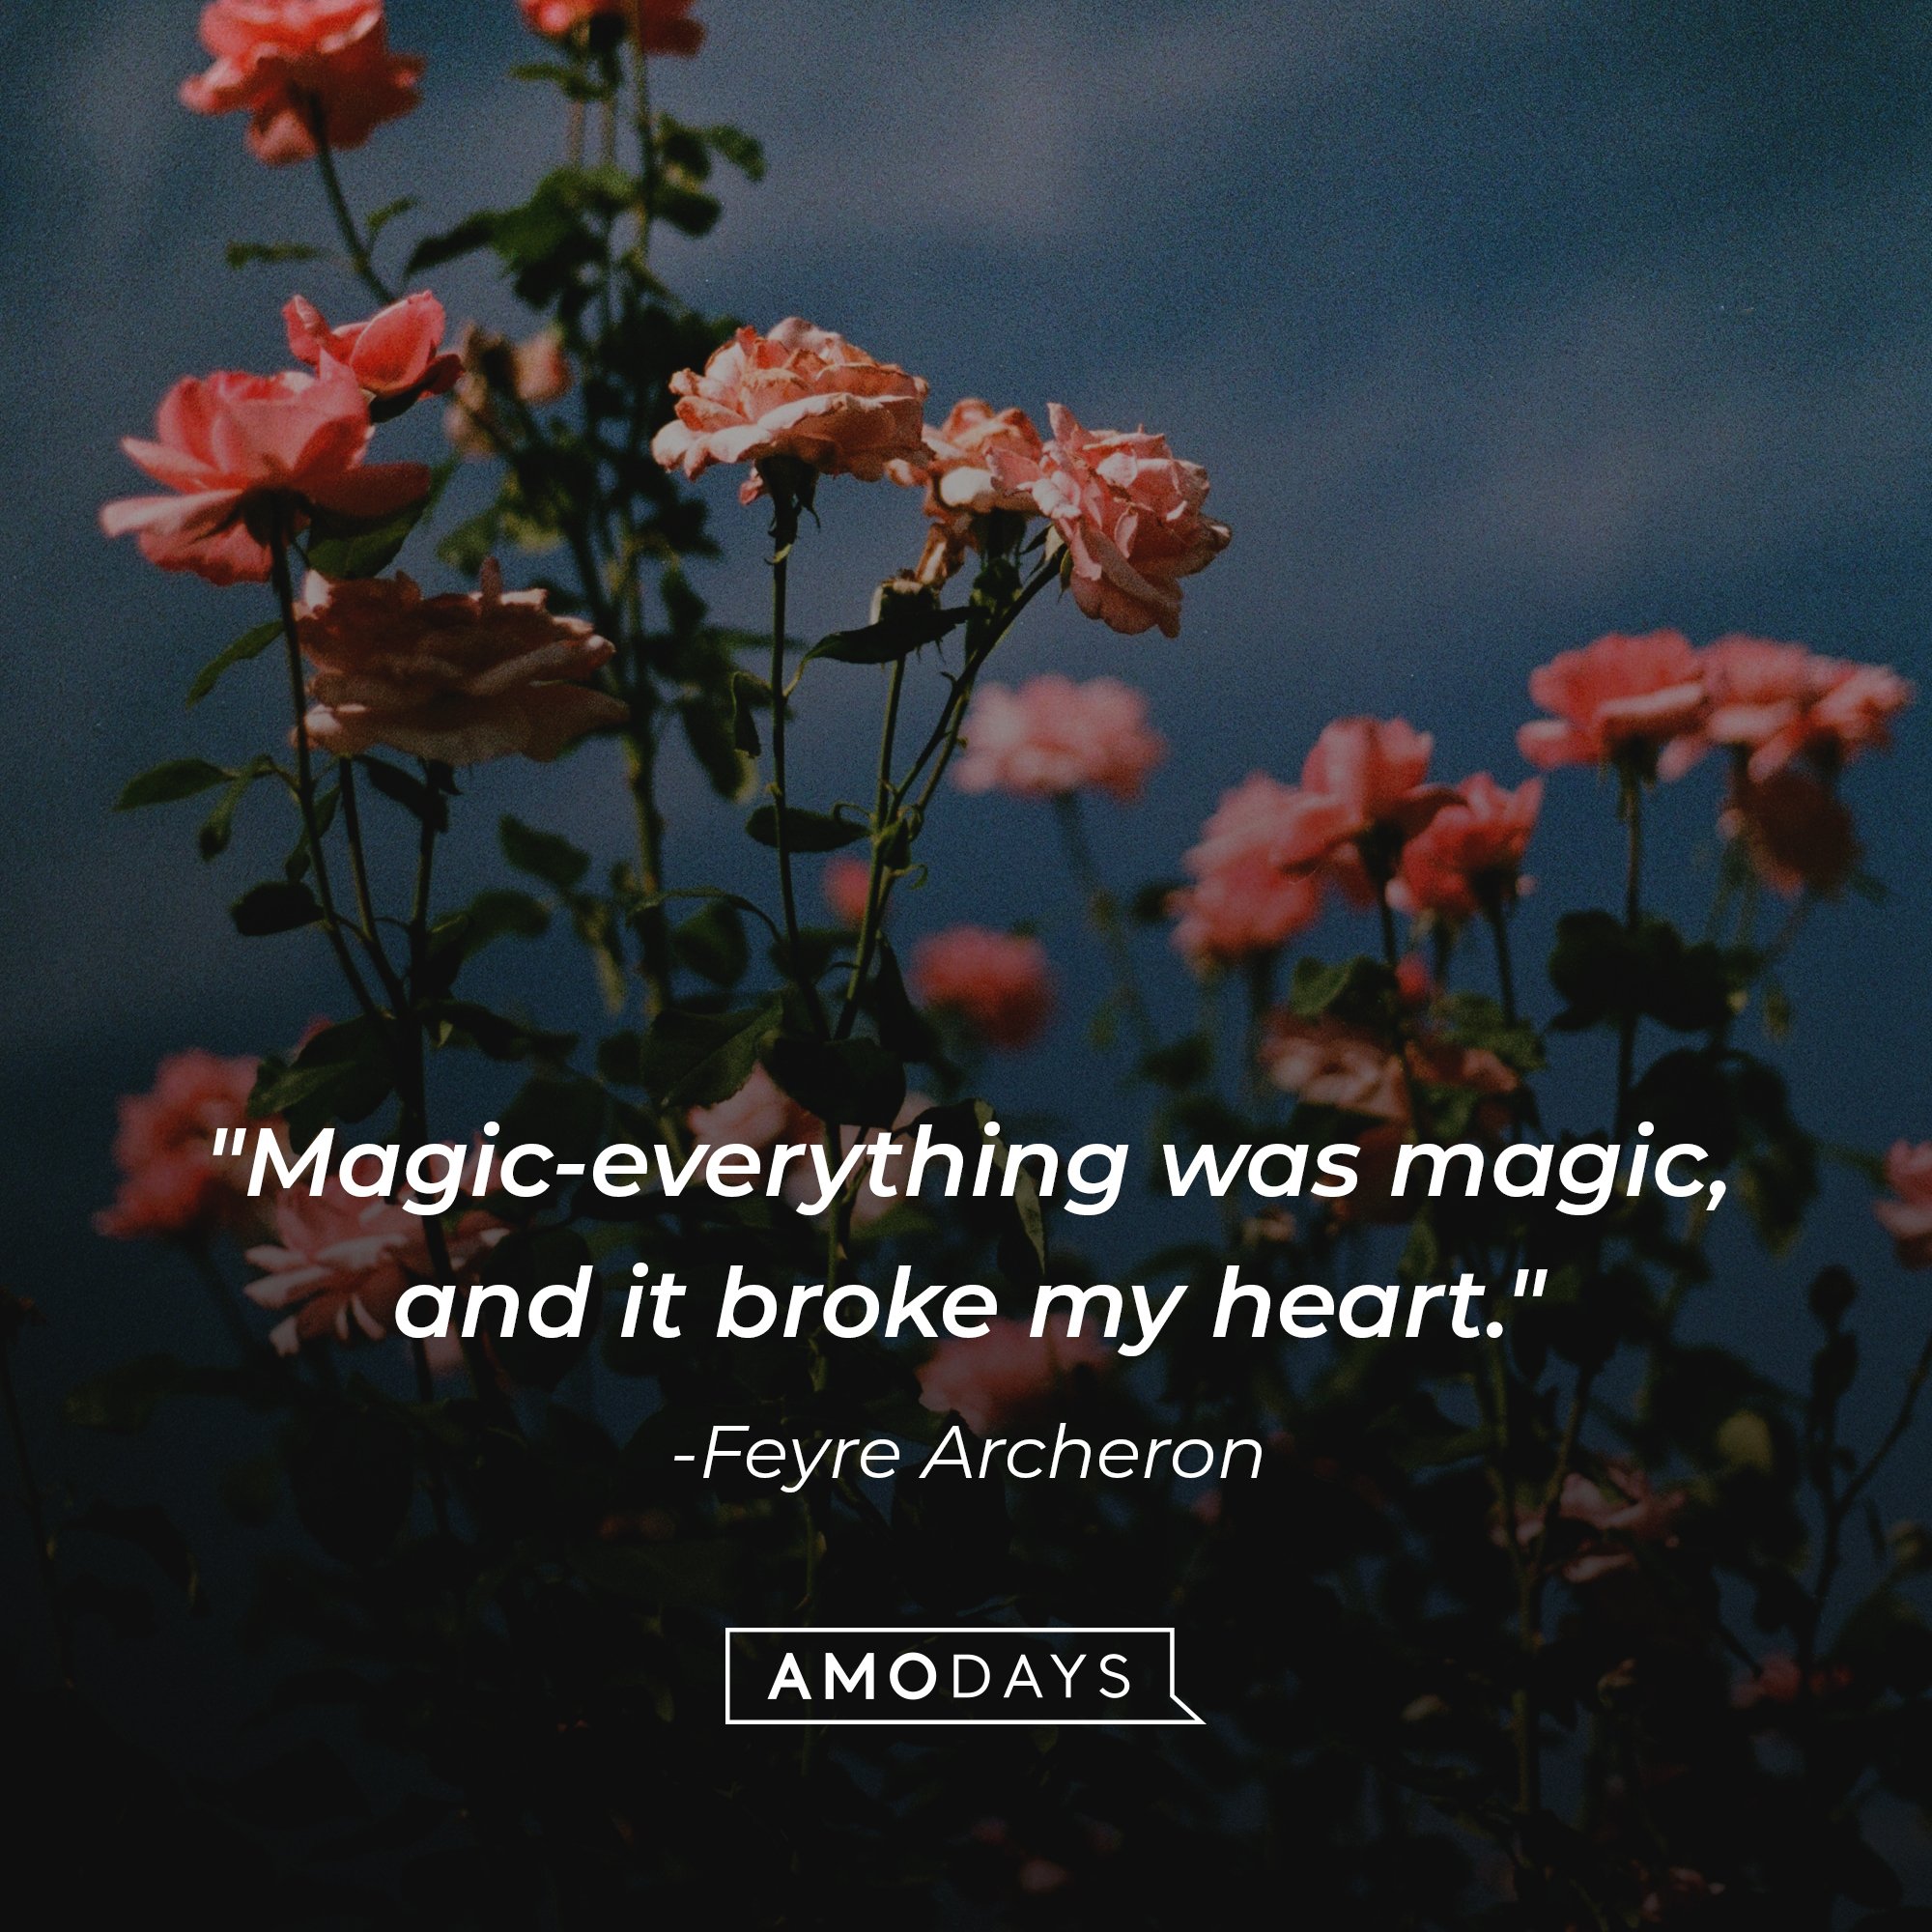  Feyre Archeron’s quote: "Magic-everything was magic, and it broke my heart." | Image: AmoDays